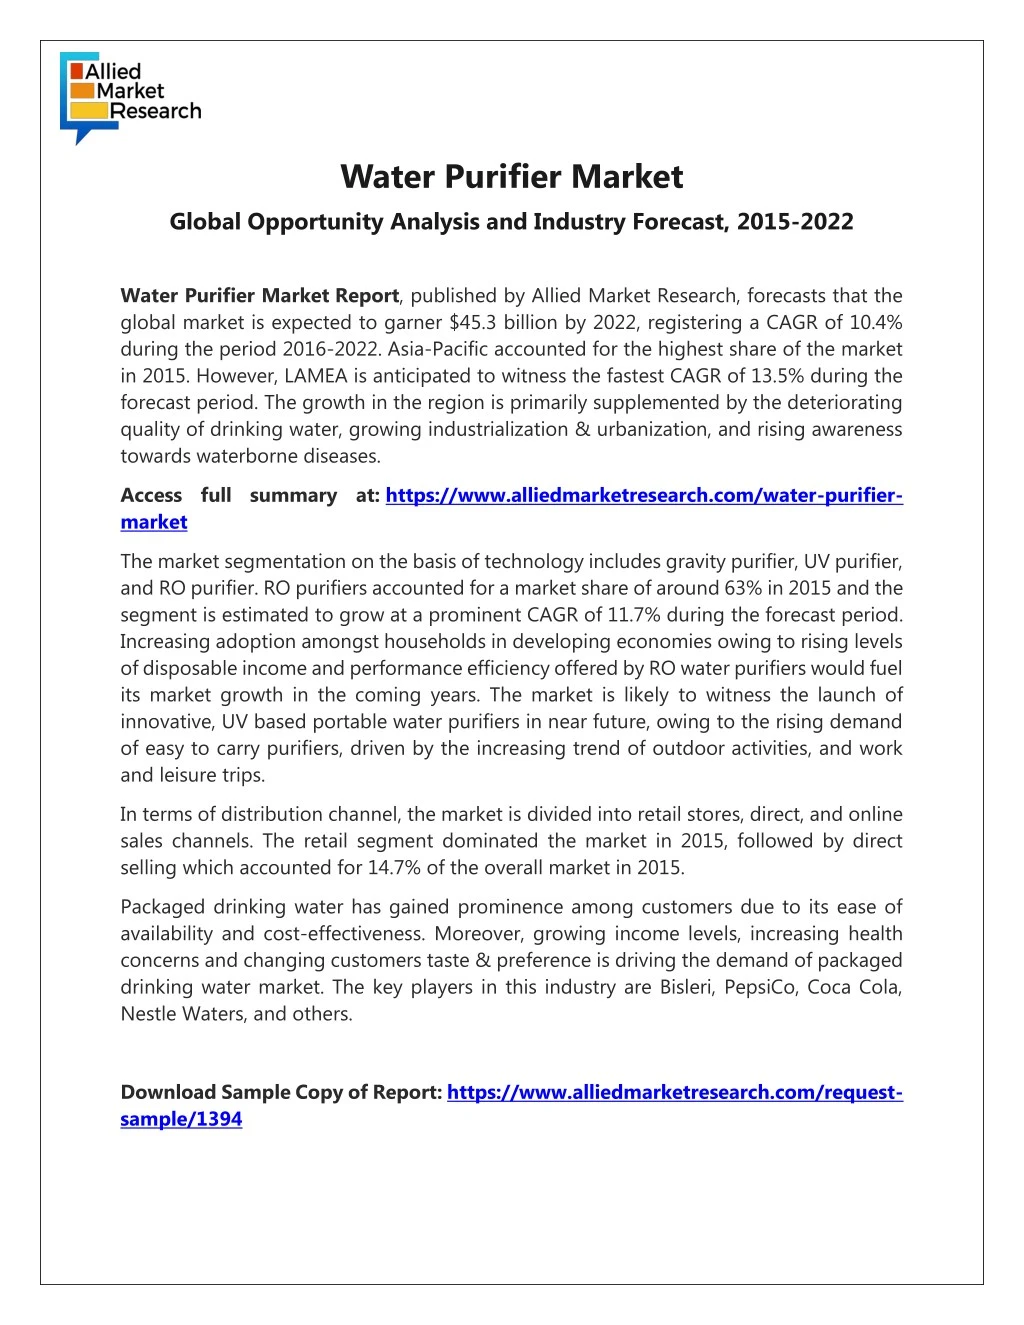 water purifier market global opportunity analysis